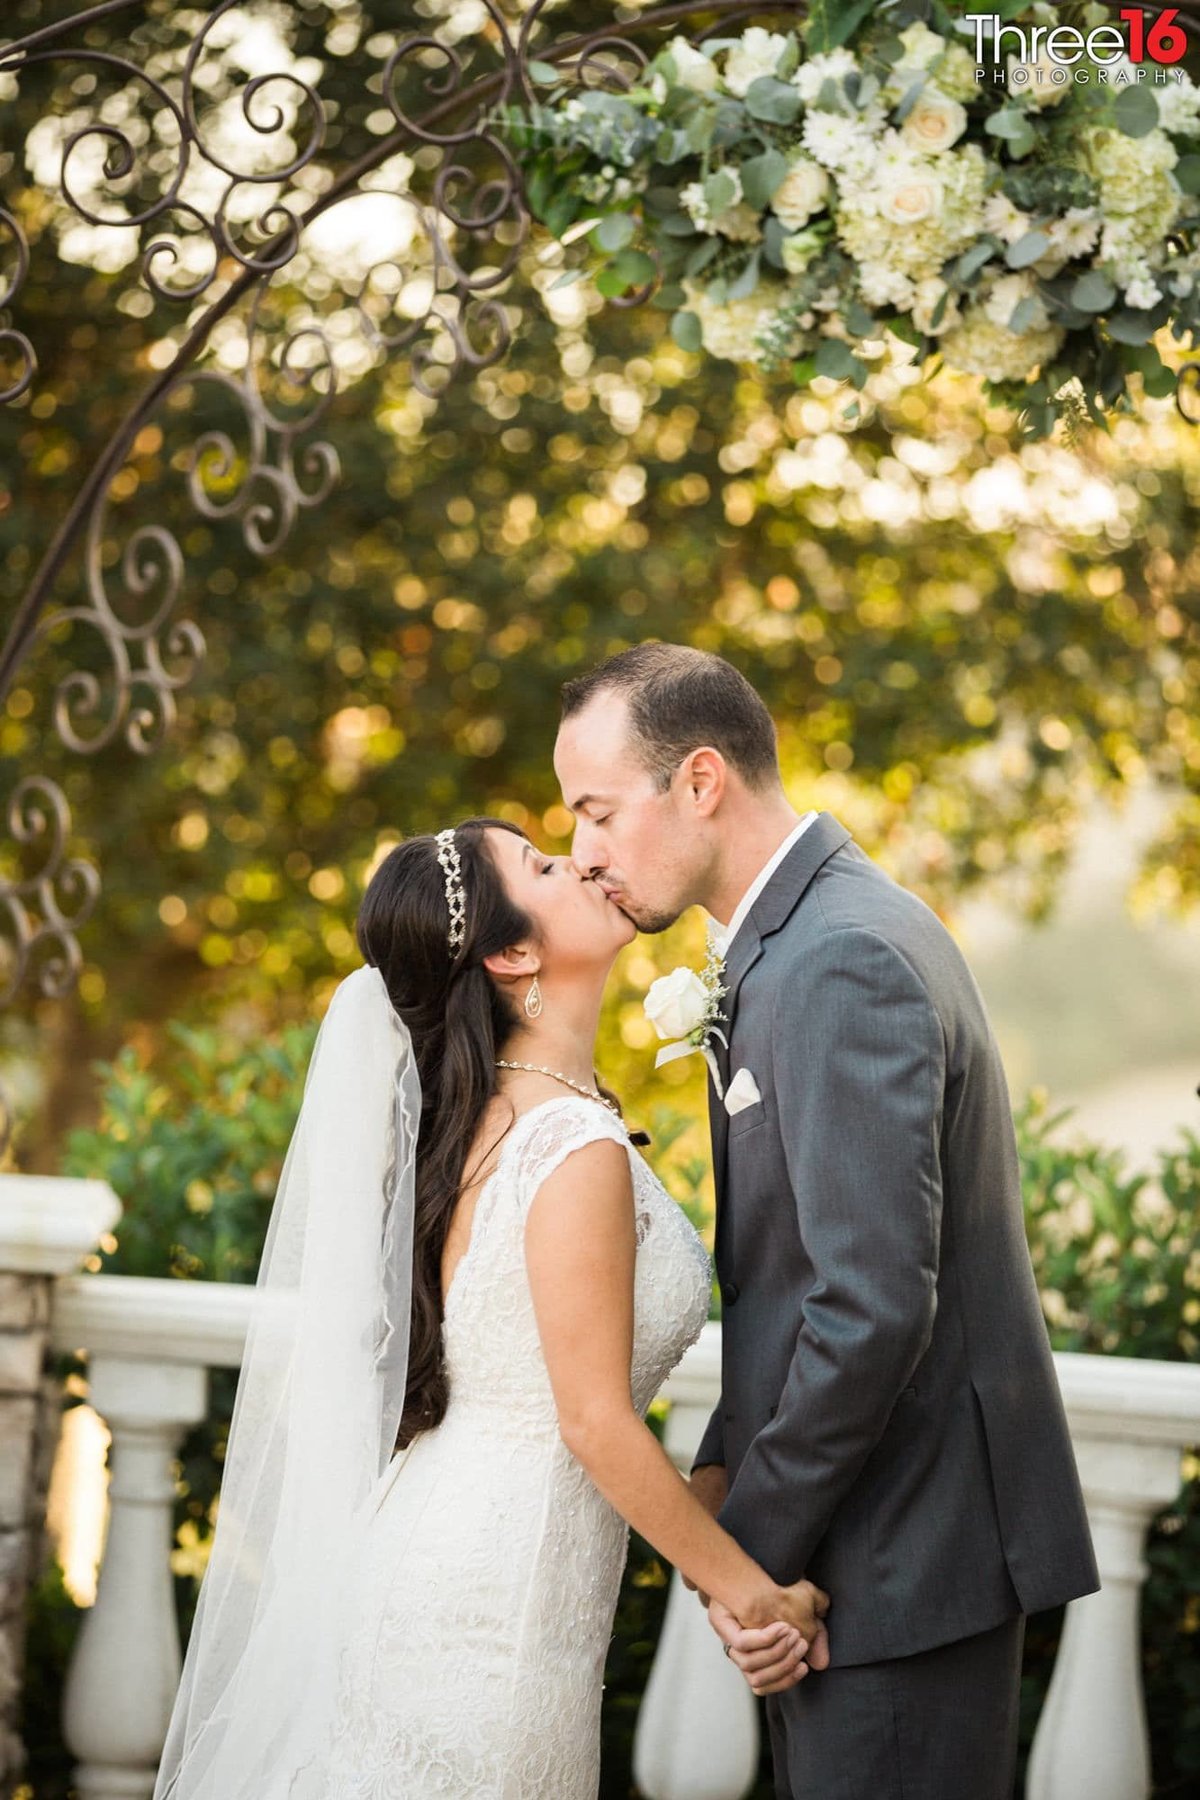 Bride and Groom share a tender kiss